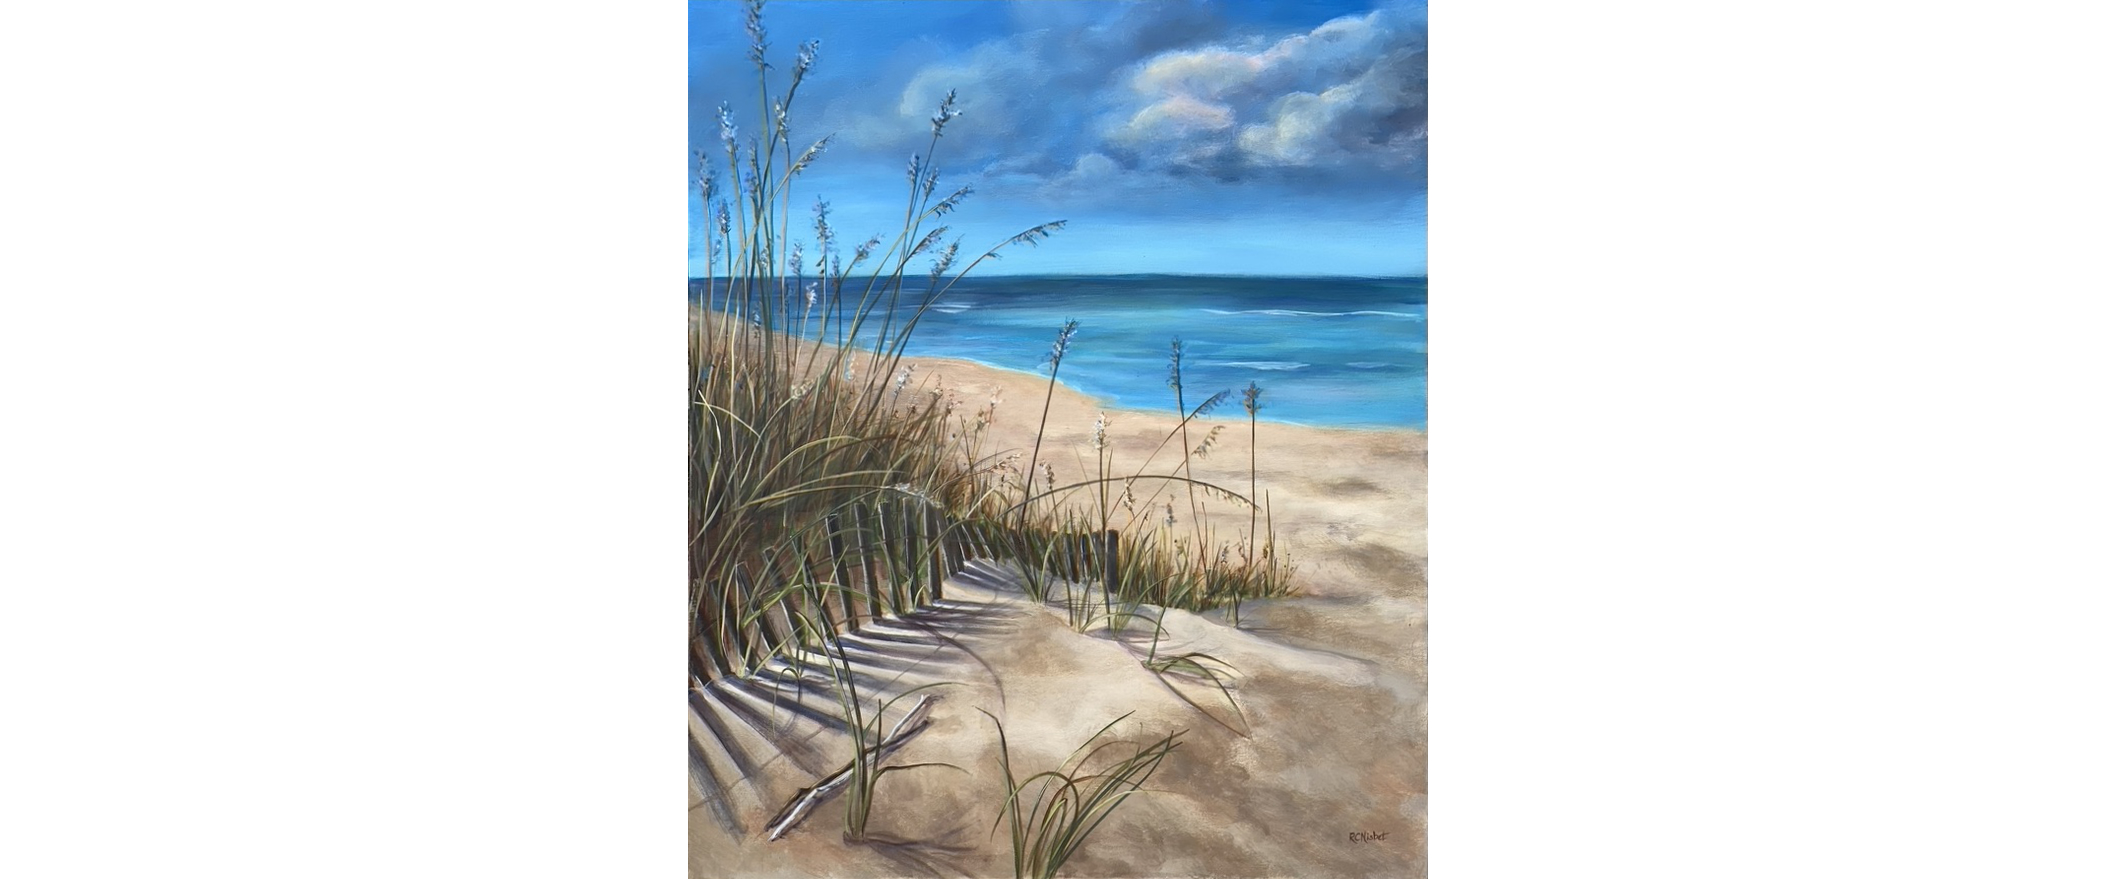 Beach scene on a very bright, sunny blue-sky day. There is soft clouds in the sky. In the foreground to the left, there is a sand fence that has some tall grasses behind it.